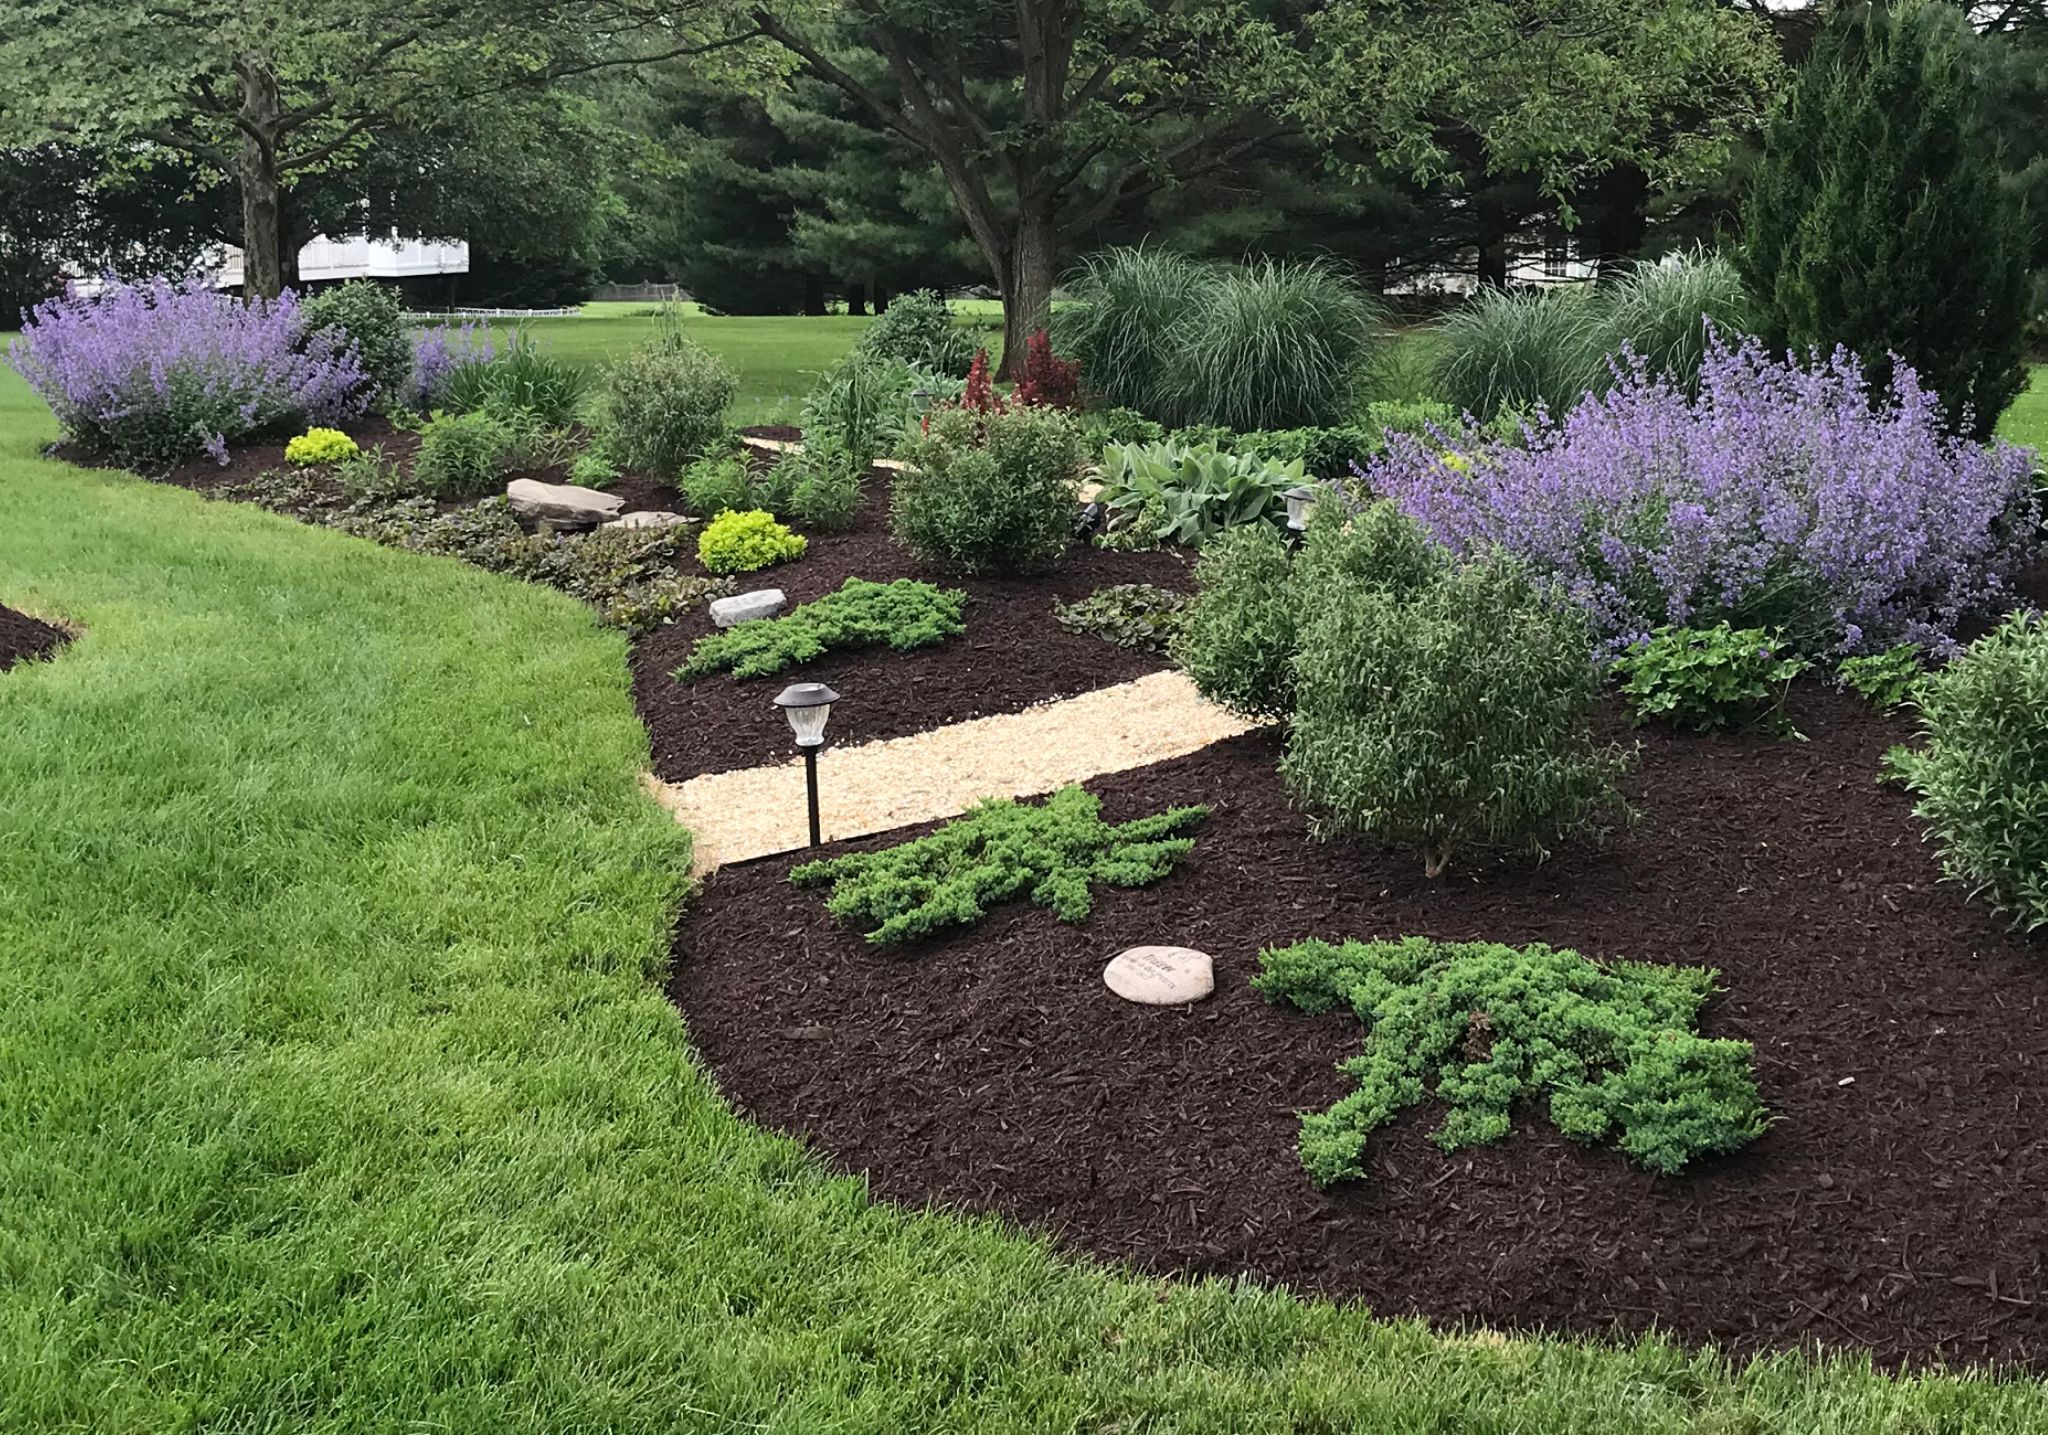 Tranquil garden example project by Greenstone Landscape Inc. in Maryland region